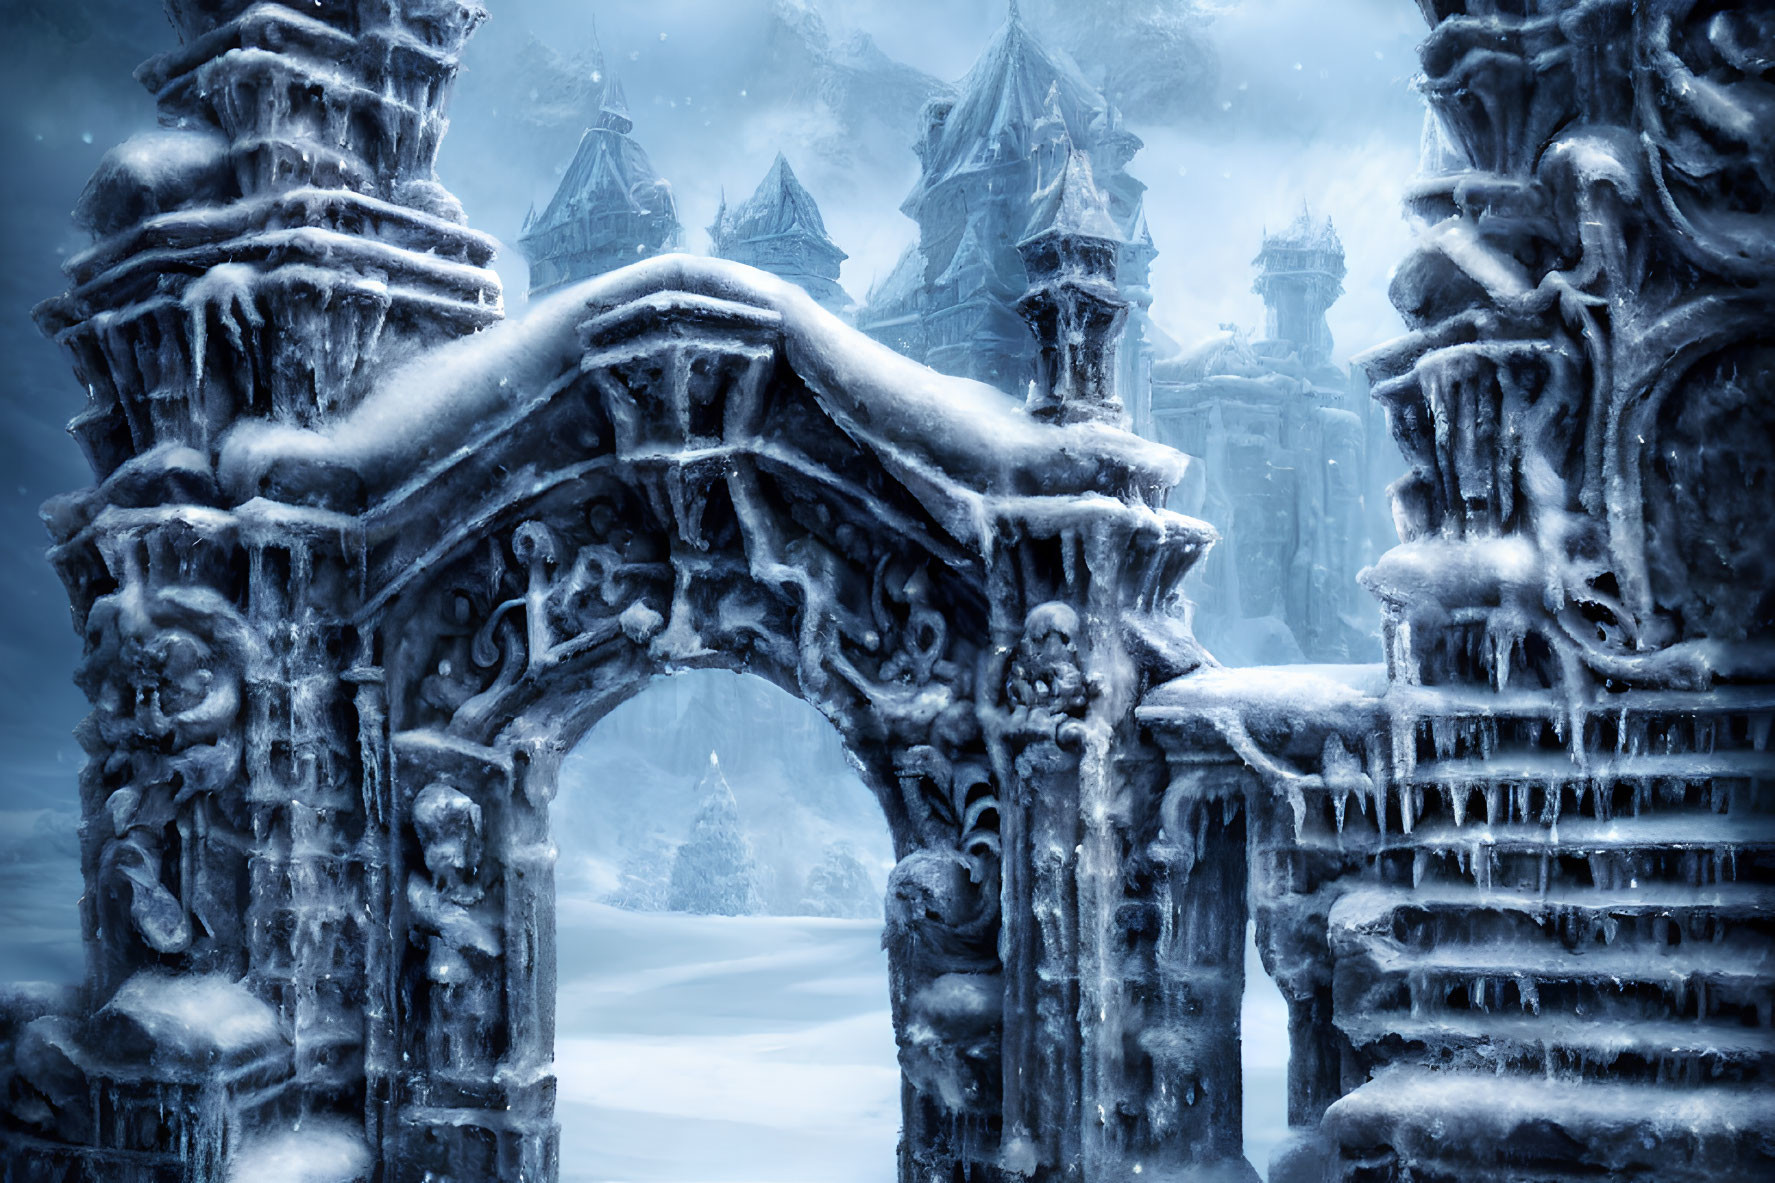 Snow-covered castle entrance under icy archway in wintry blizzard